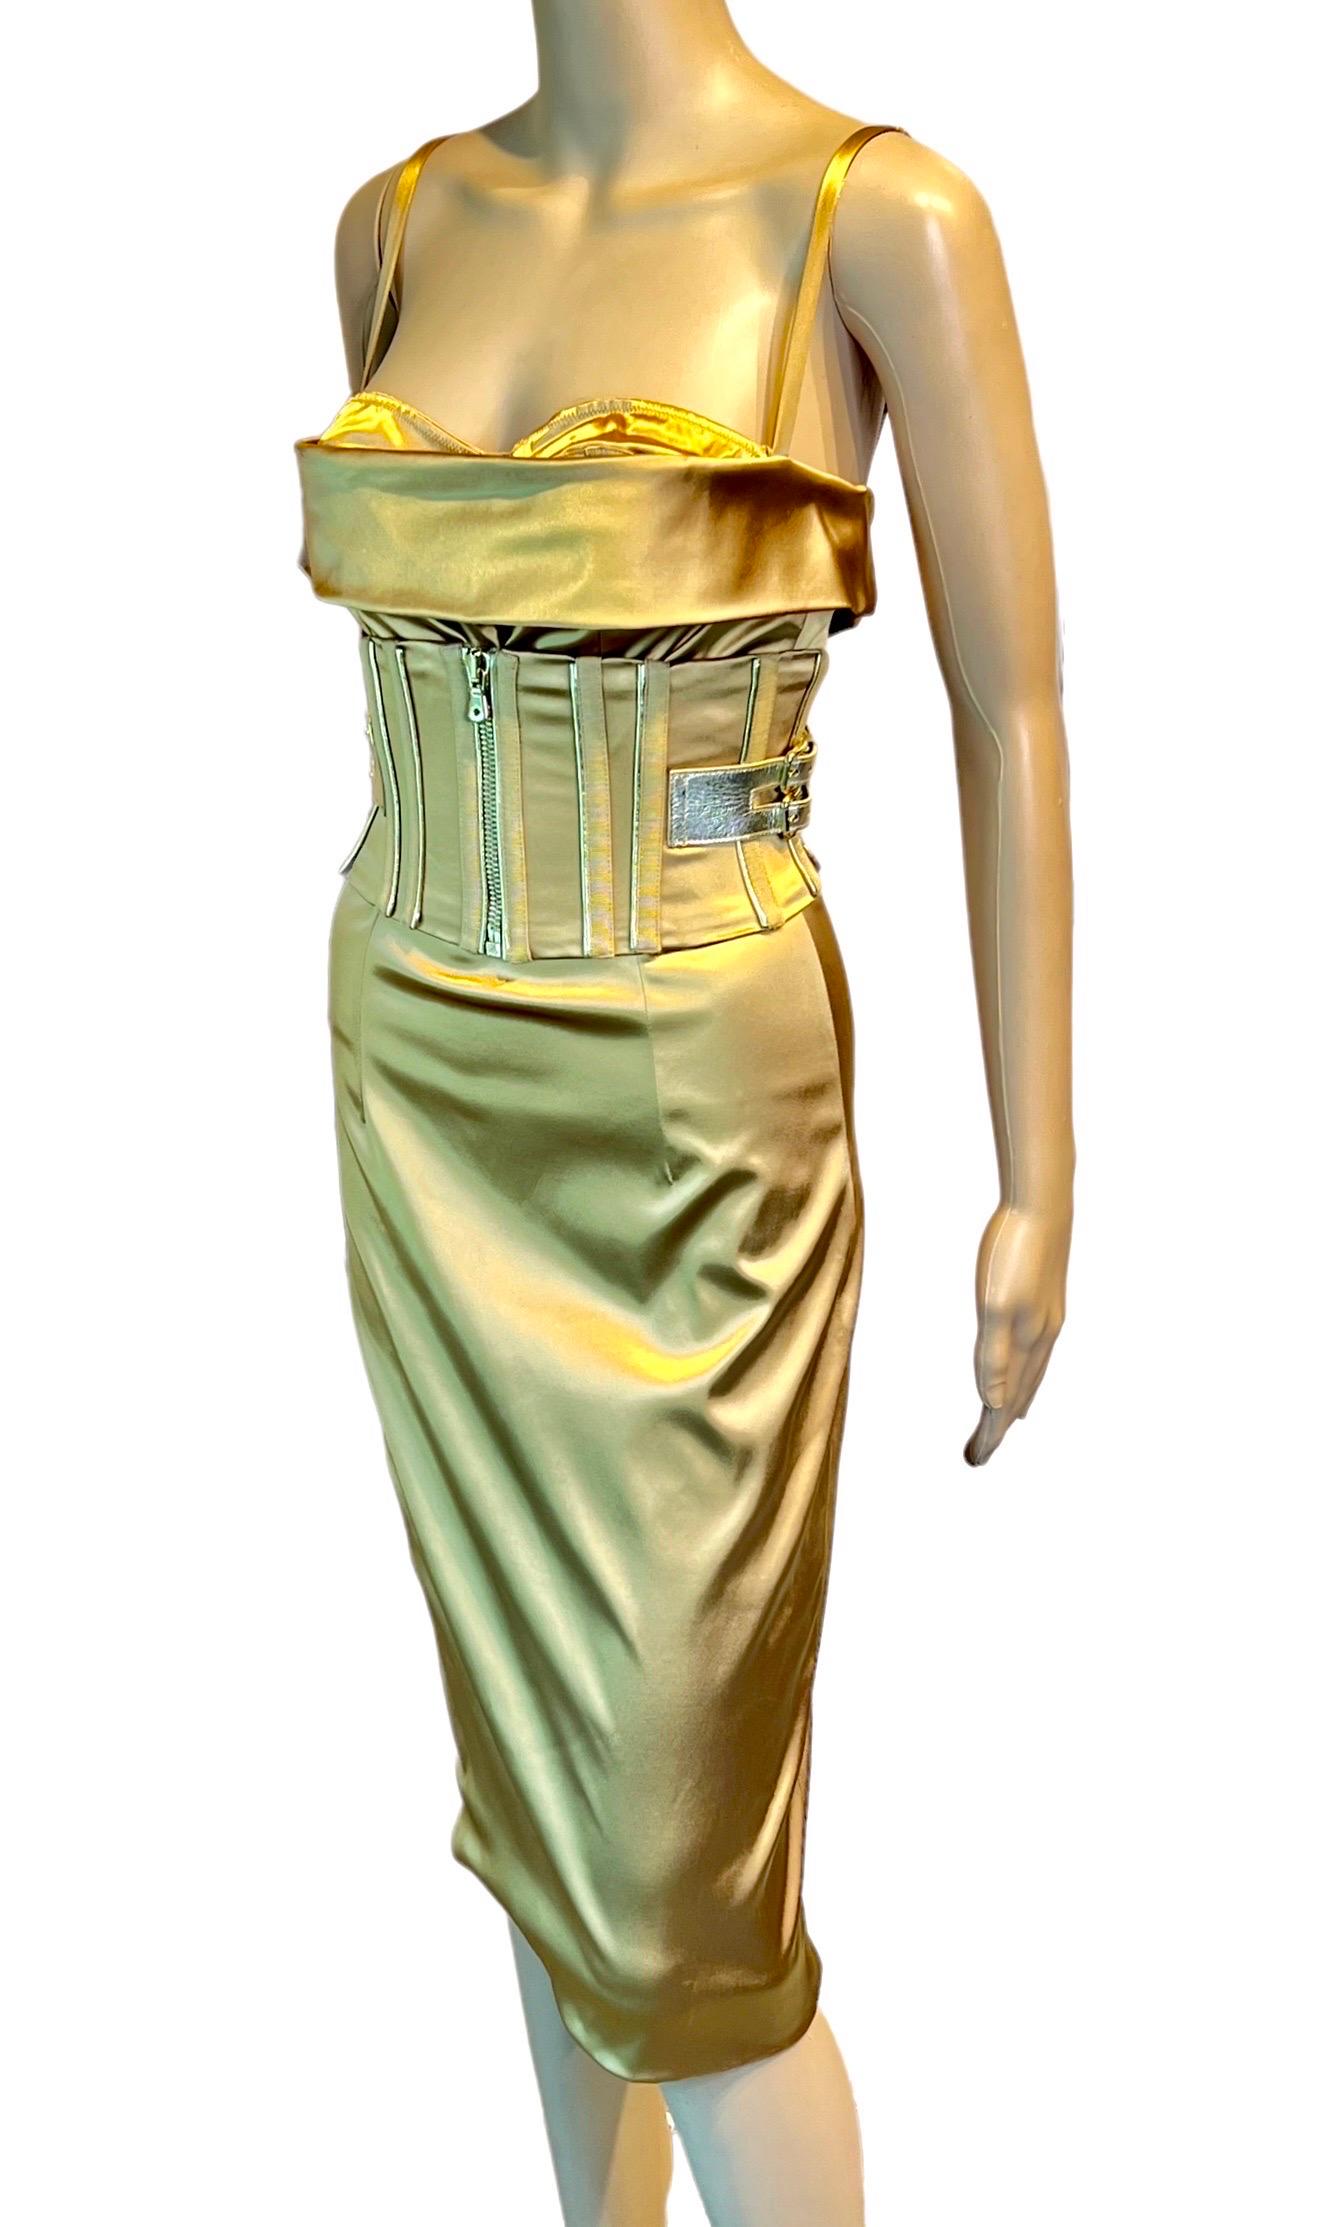 Women's Dolce & Gabbana S/S 2007 Corset Belted Bra Bustier Bodycon Gold Acetate Dress For Sale